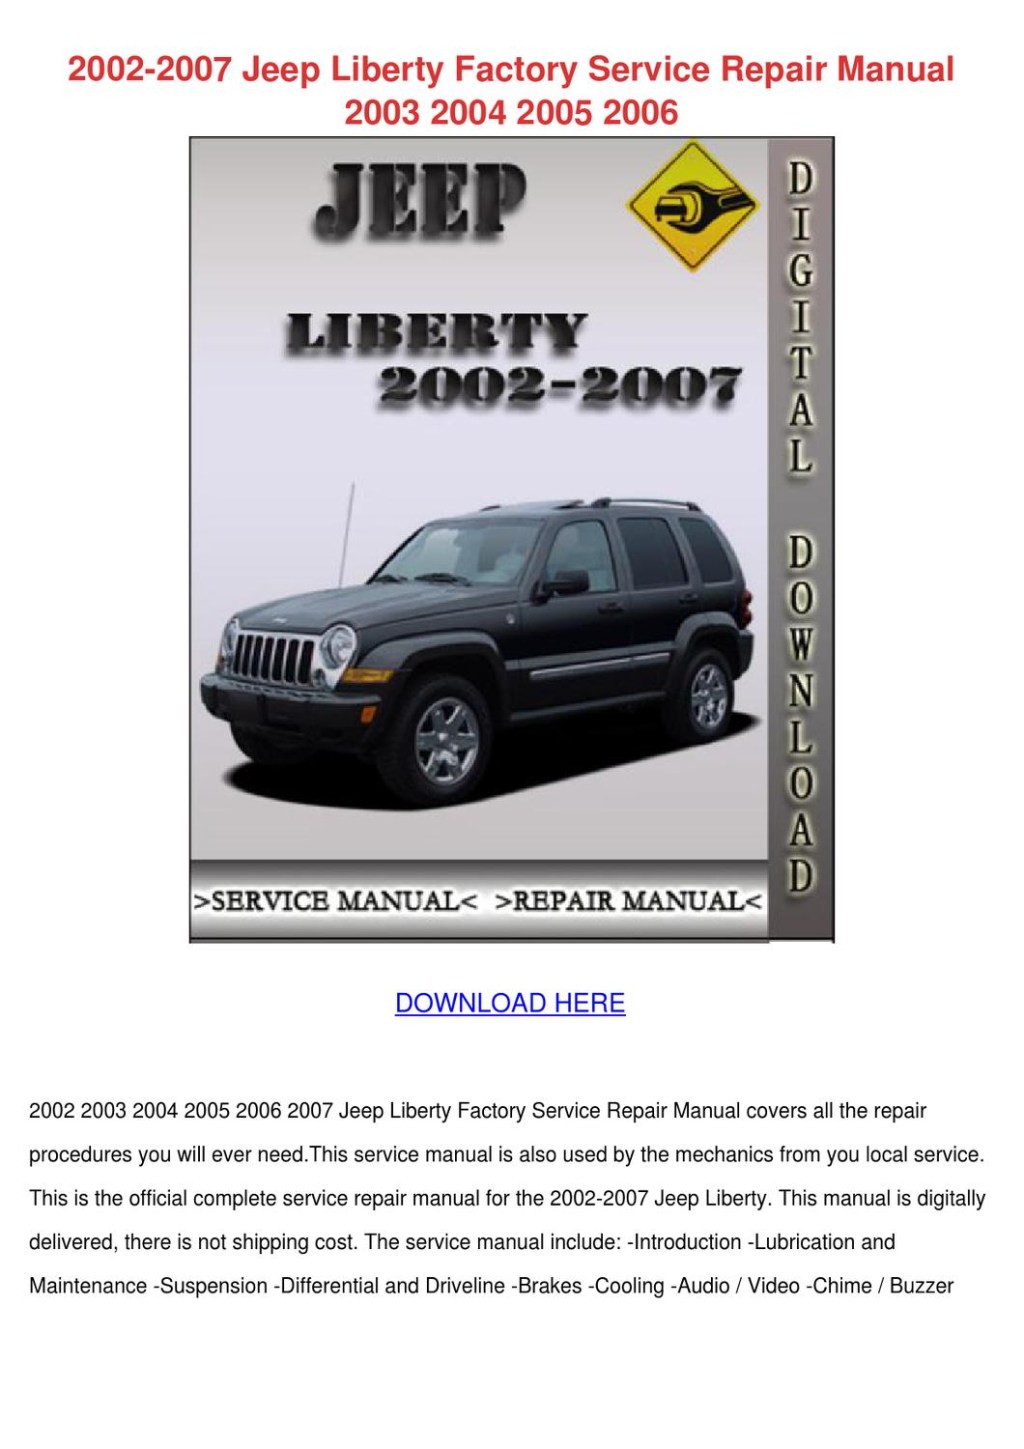 Picture of: Jeep Liberty Factory Service Repair by WeldonTurk – Issuu